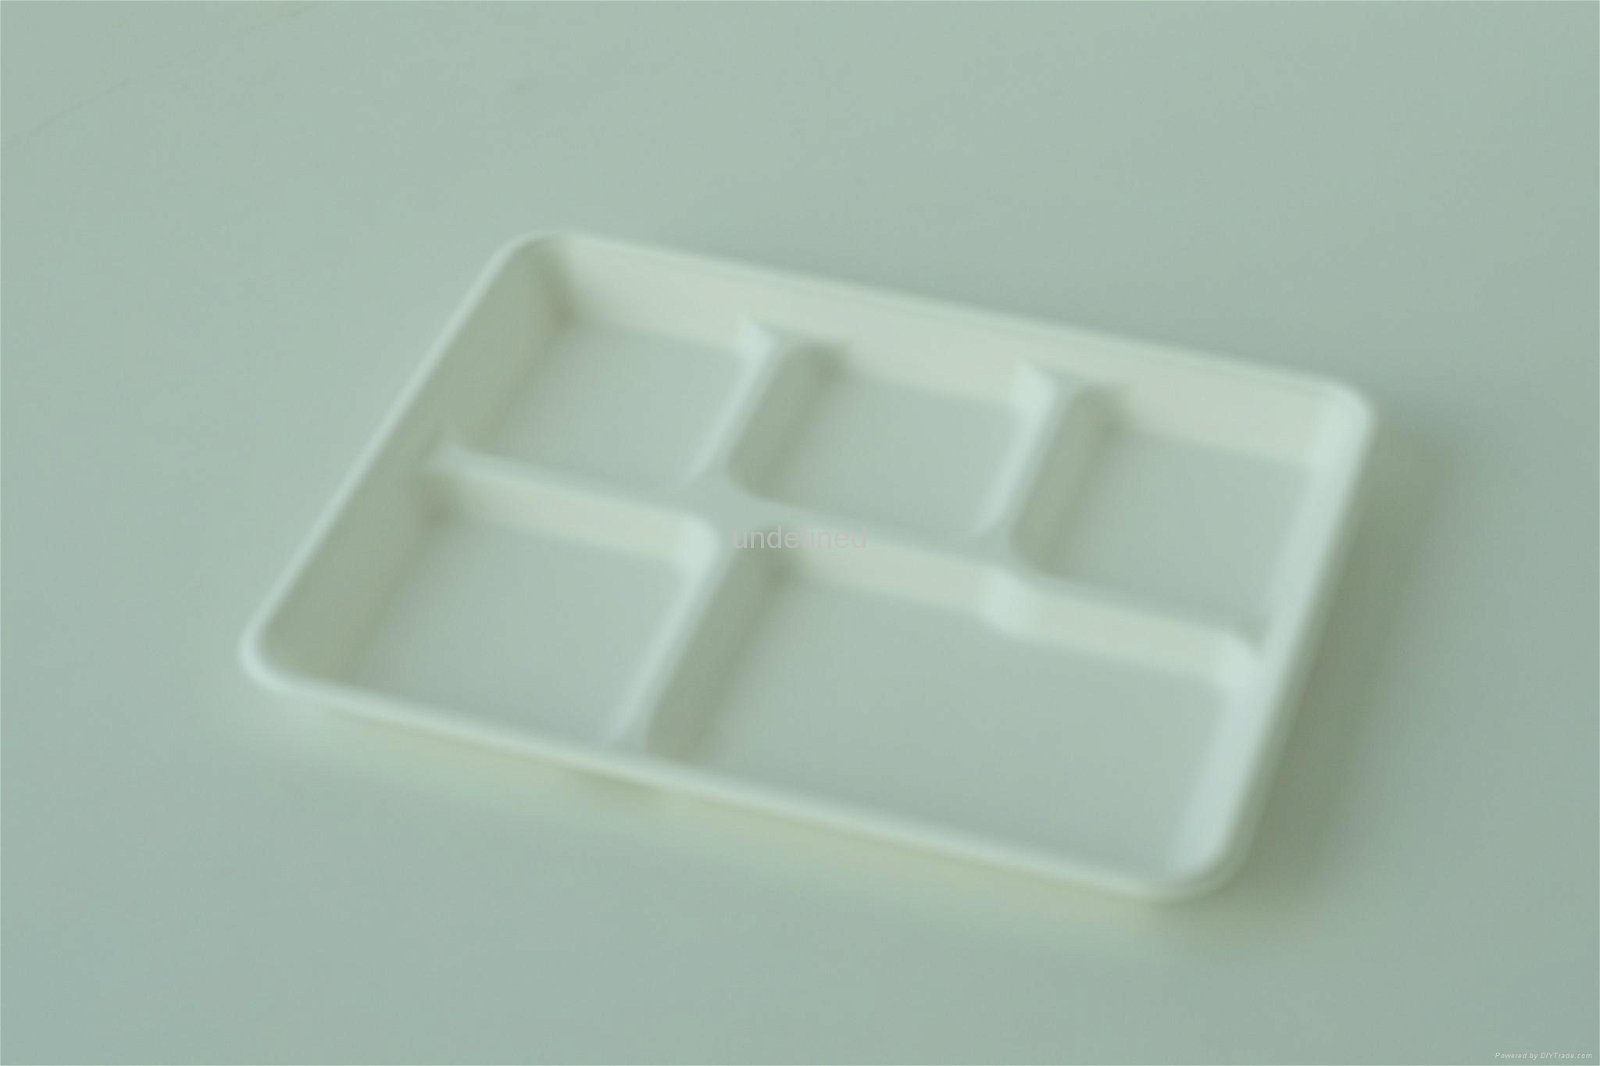  disposable compostable food packaging  5 Compartment   Tray  2